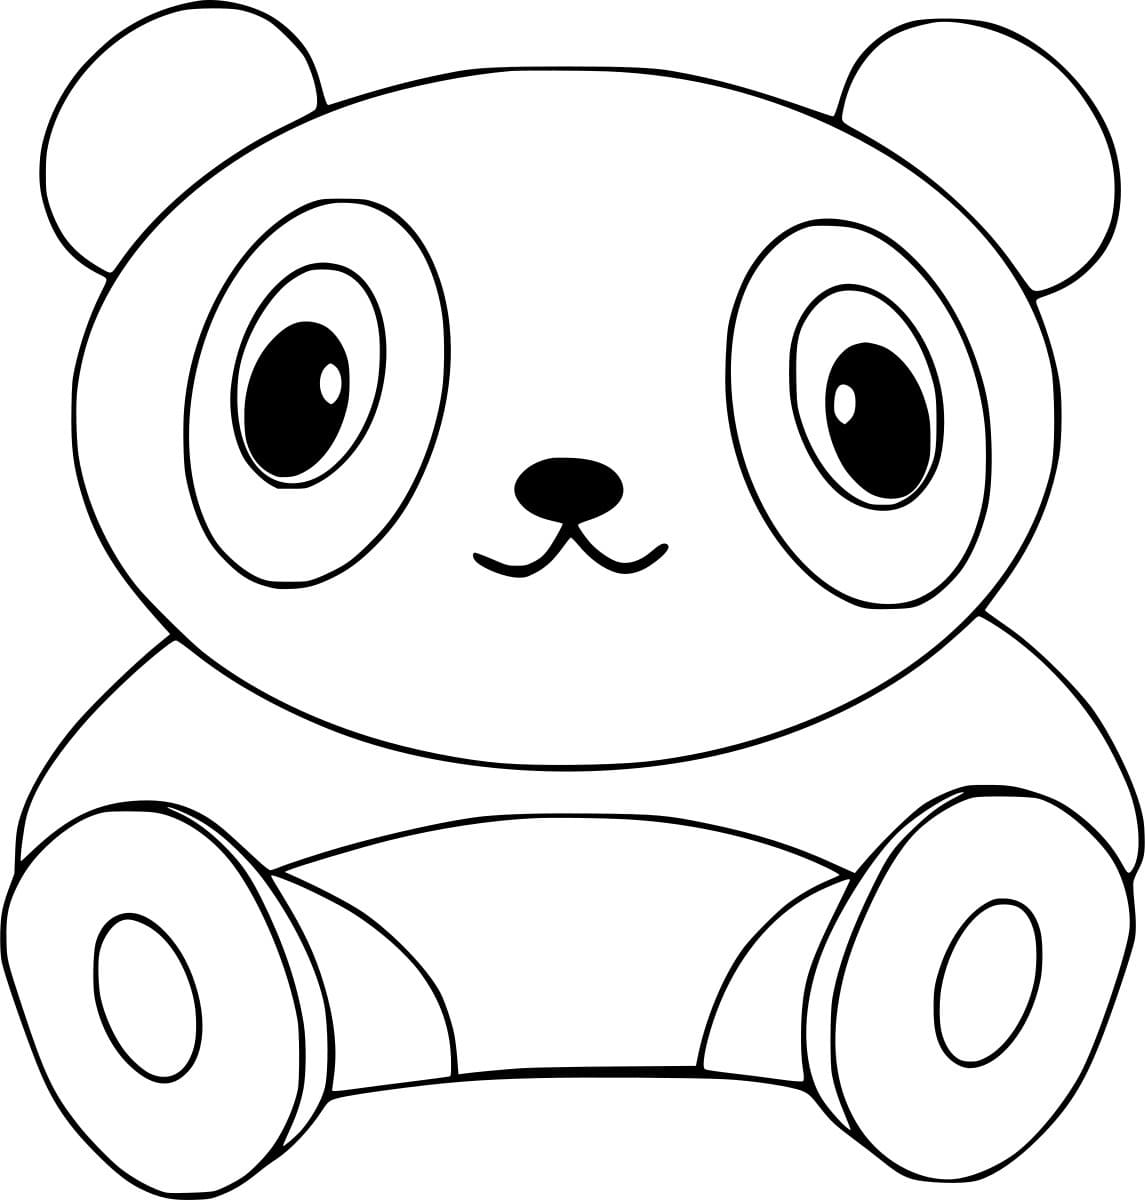 Cute Panda Sits On The Ground Coloring Page